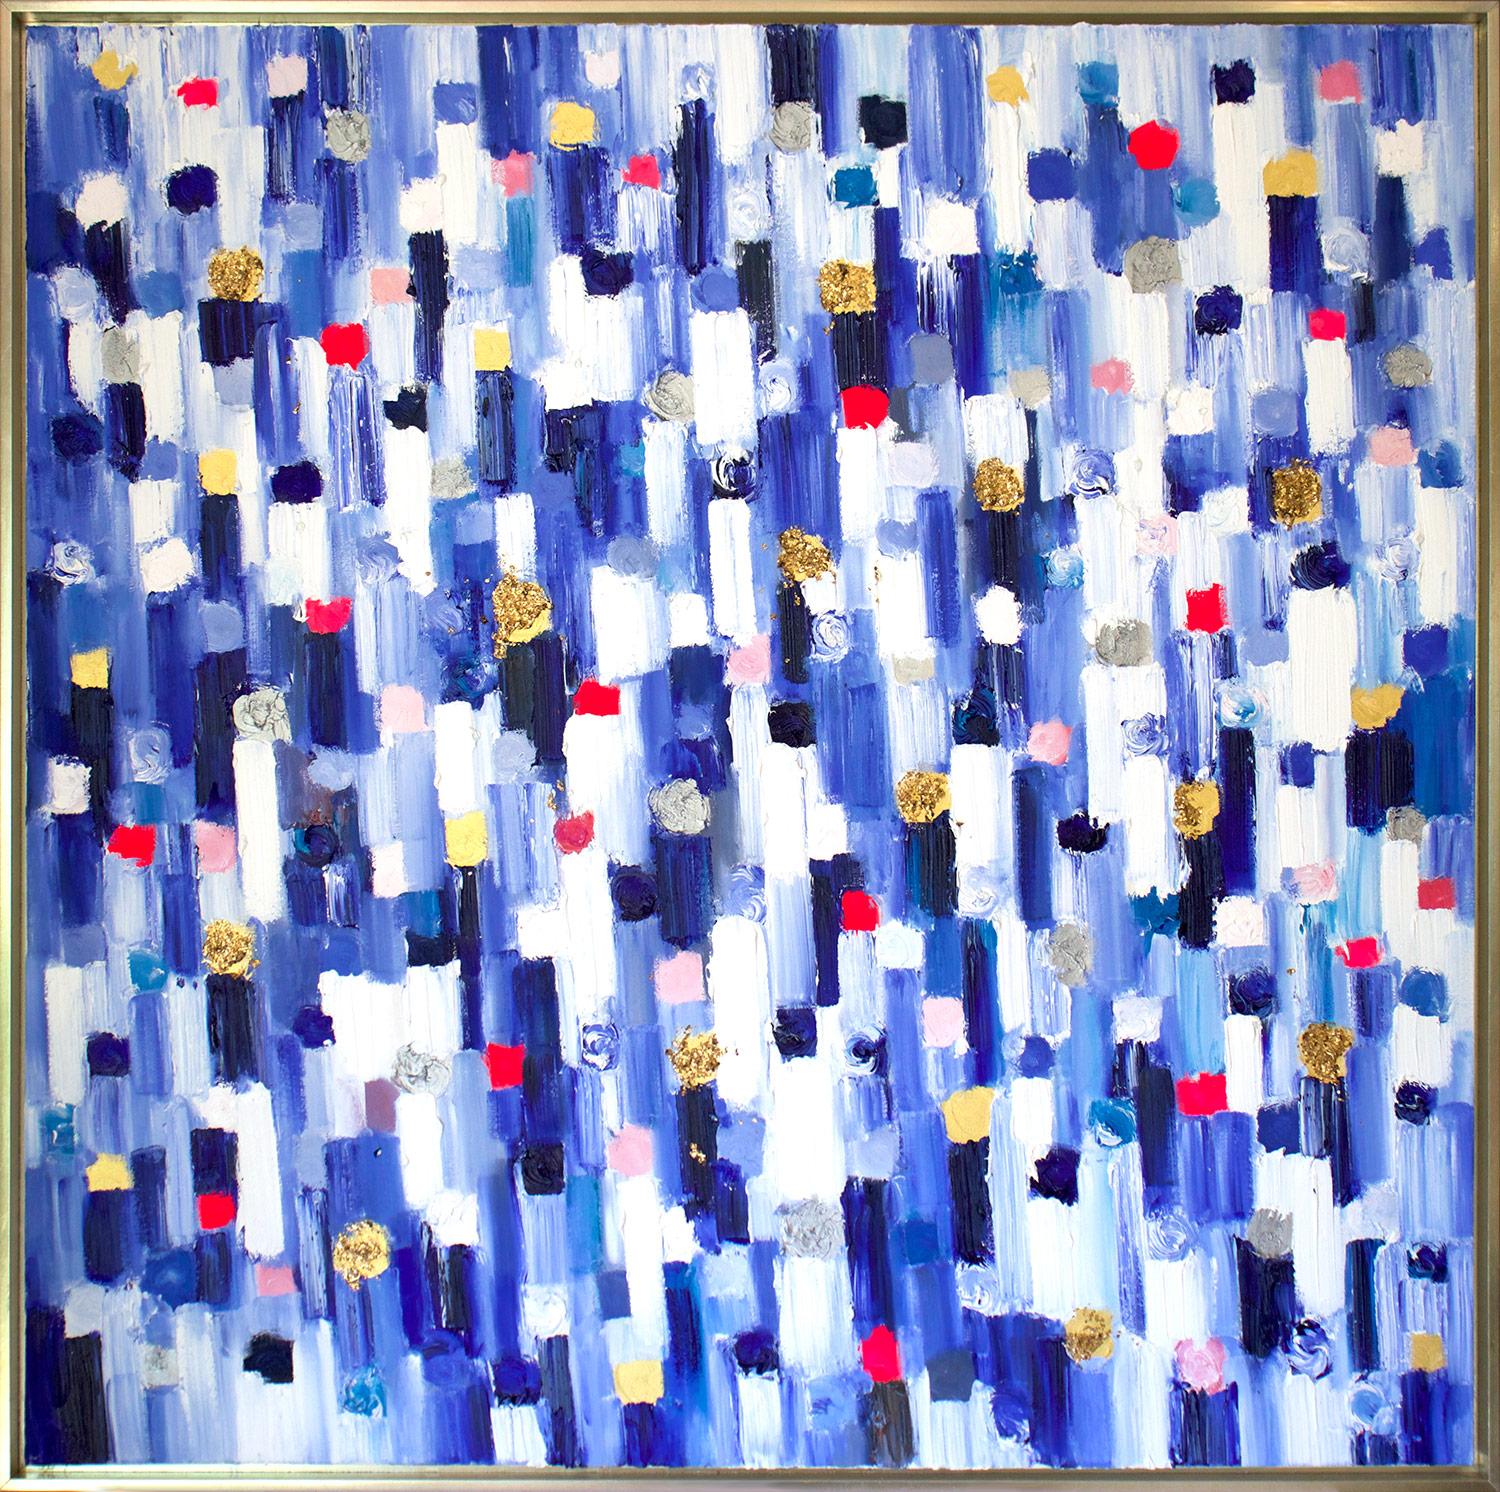 Cindy Shaoul Abstract Painting - "Dripping Dots - Monaco" Colorful Contemporary Abstract Oil Painting on Canvas